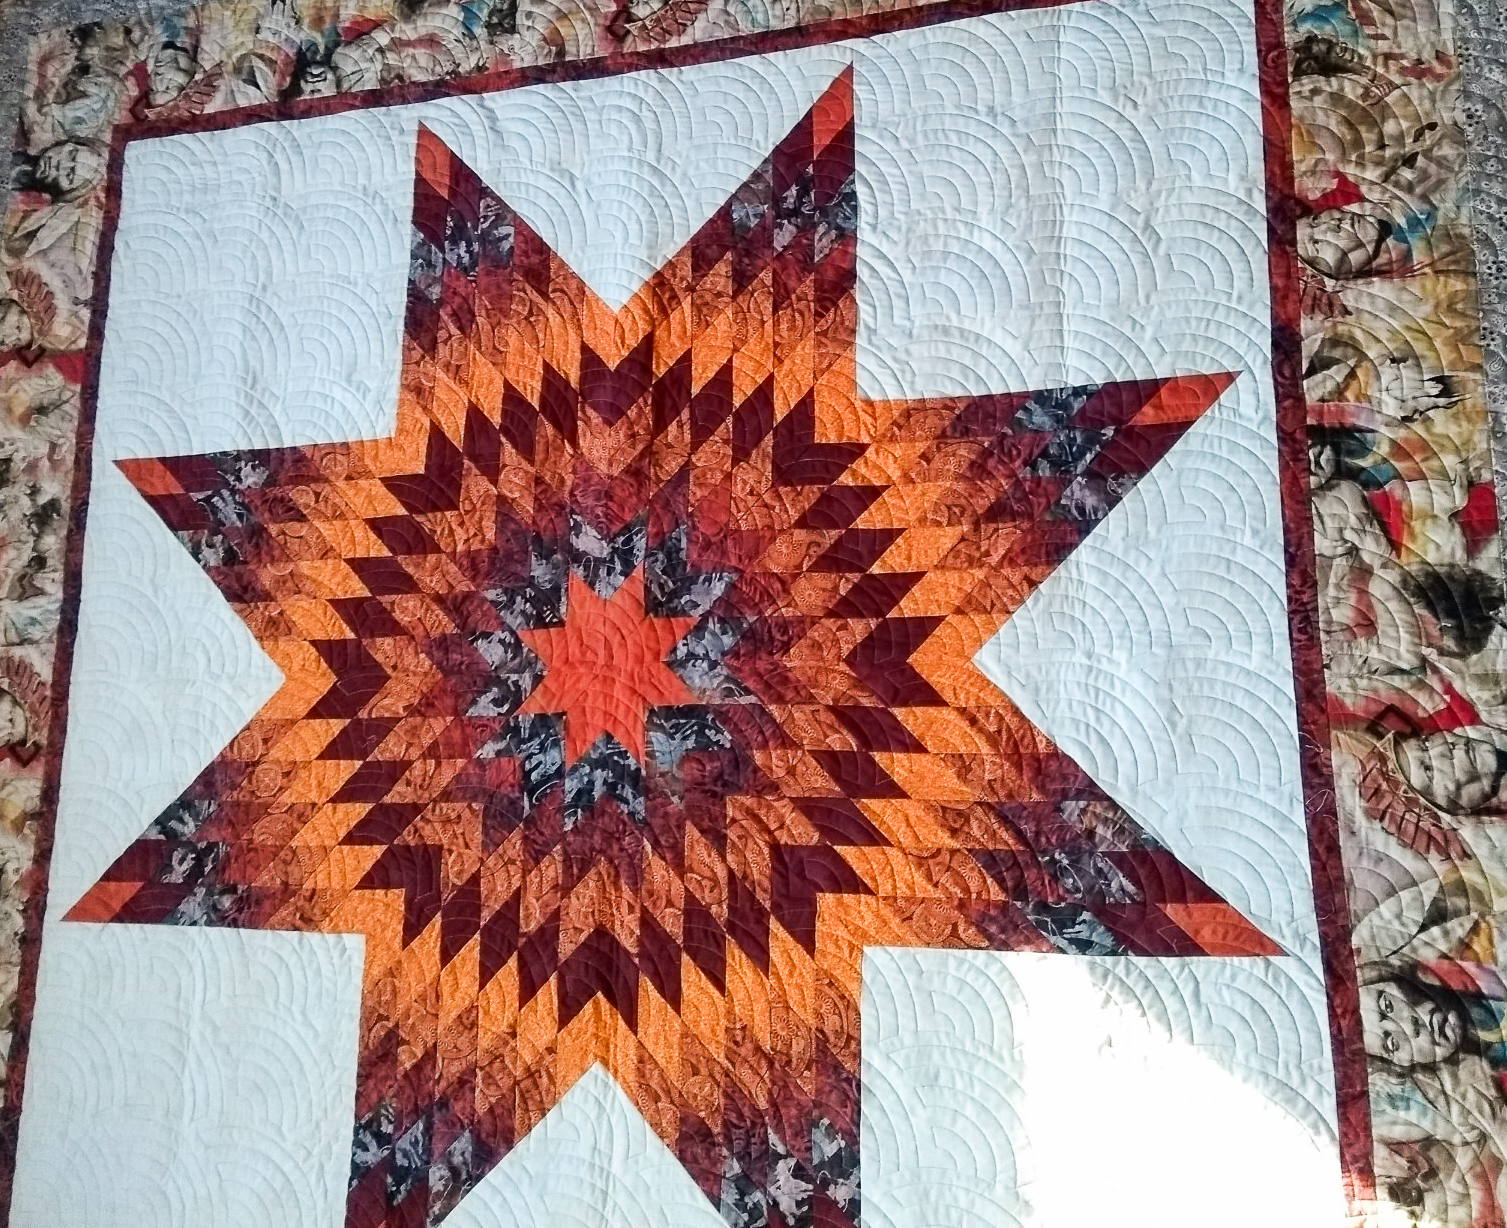 A quilt made with an eight-point star pattern with shades of orange and red and a white backdrop. The edge of the quilt is made of a patterned printed fabric depicting a person in Native American head gear.